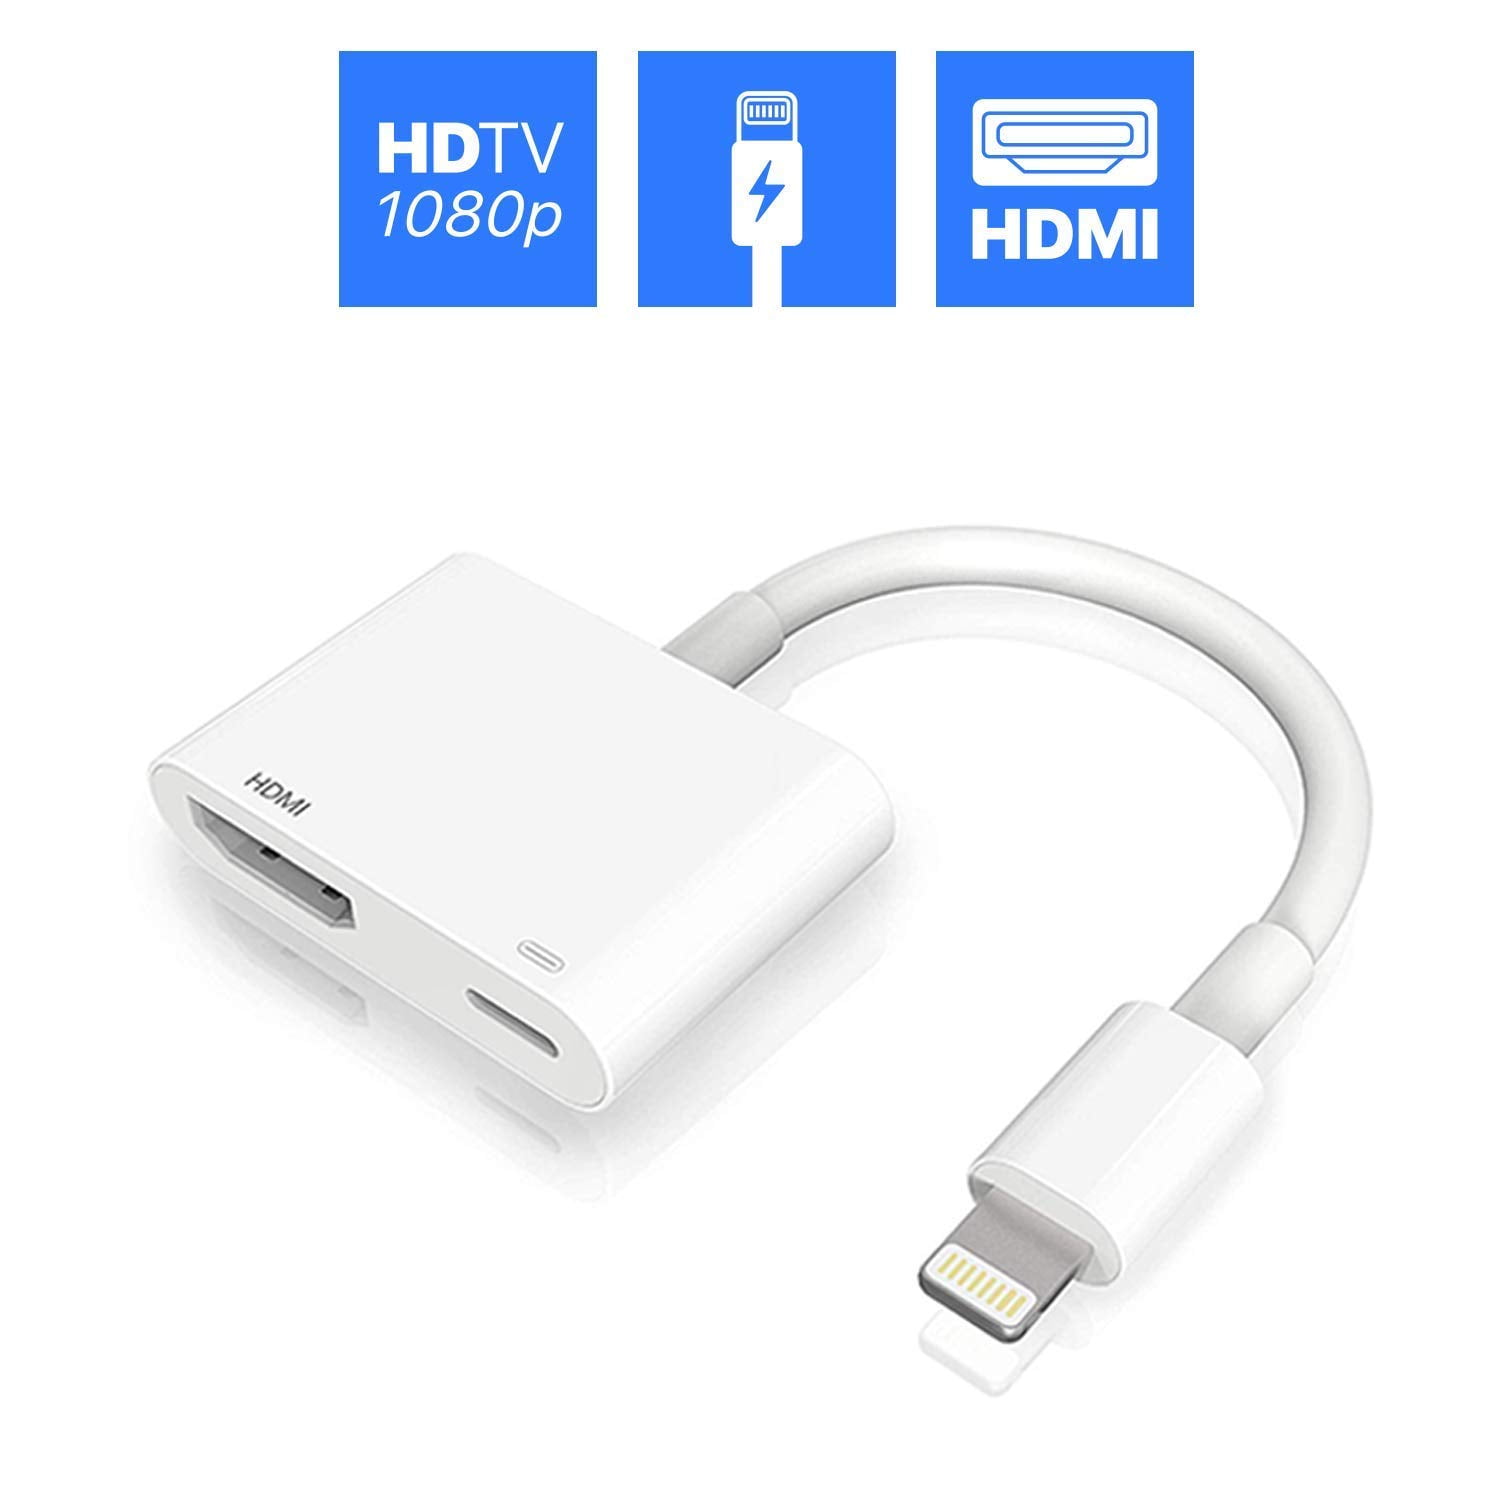 Digital AV Adapter 1080p HD TV Connector Cord Compatible with iPhone Xs Max XR 8 7 6Plus iPad Pro Mini Air to TV Projector Monitor Baymic Compatible with iPhone iPad to HDMI Adapter Cable